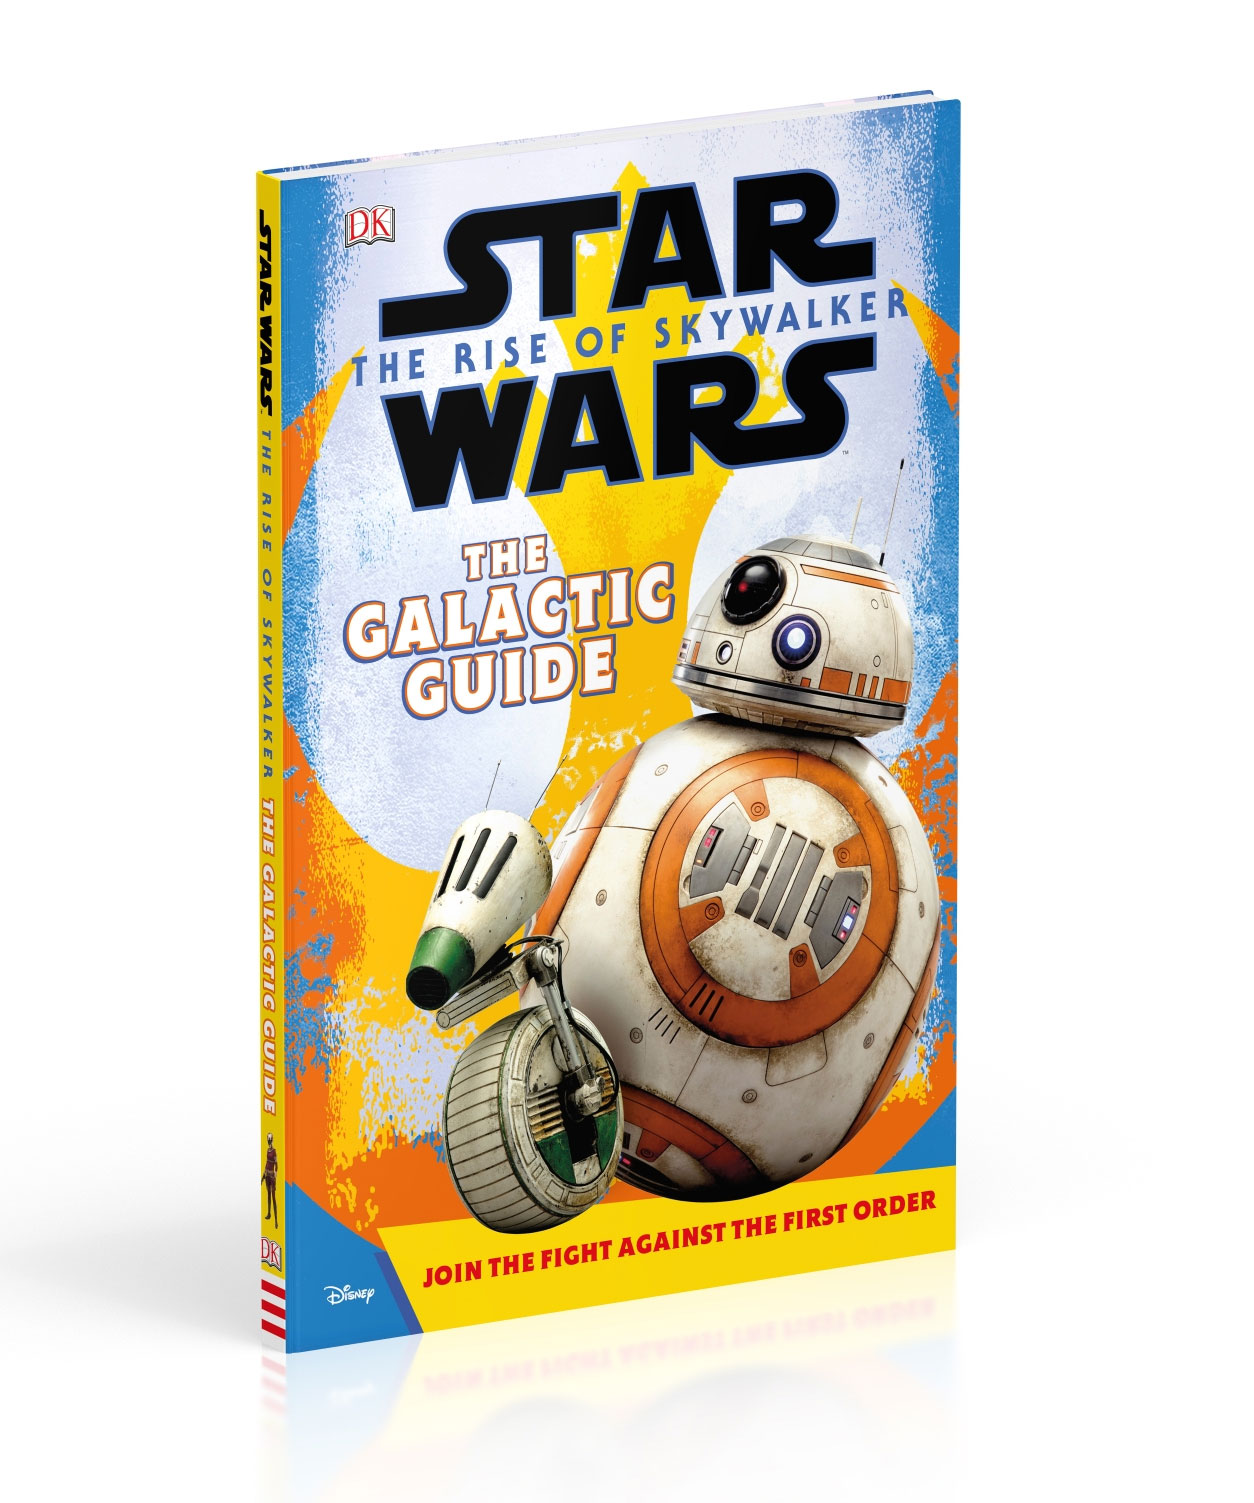 Star Wars: The Rise of Skywalker - The Galactic Guide